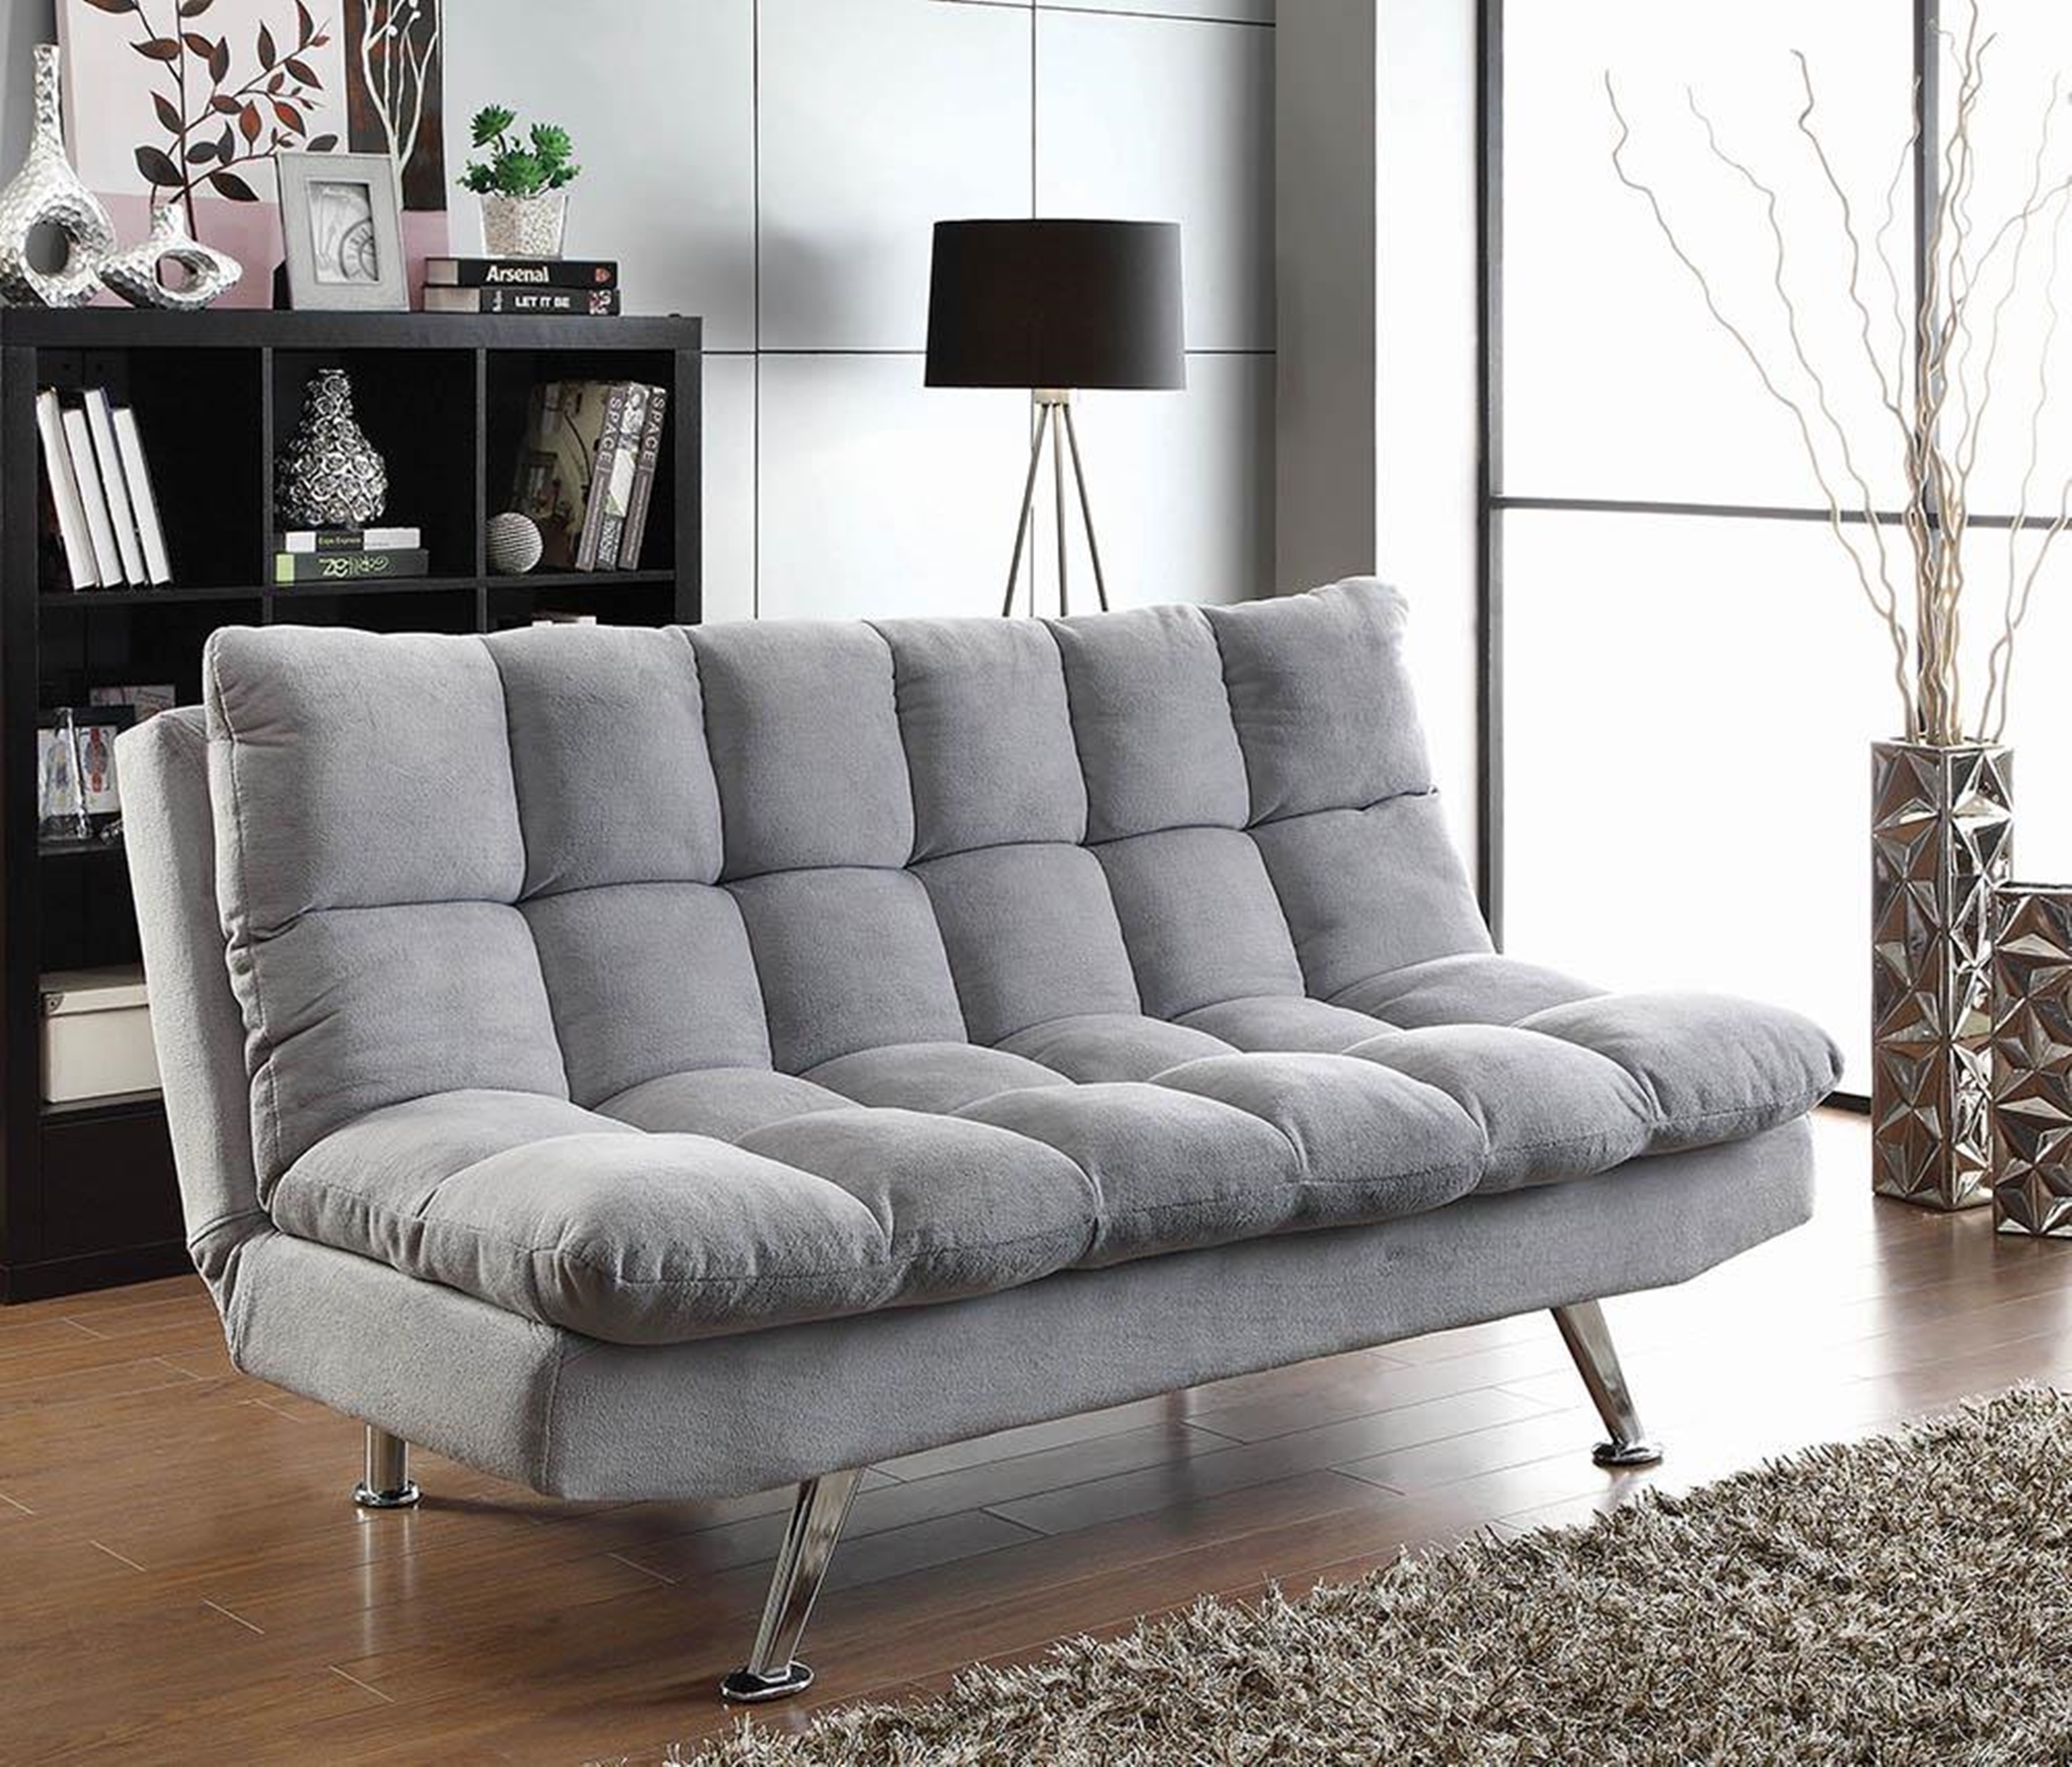 Transitional Dark Grey and Chrome Sofa Bed